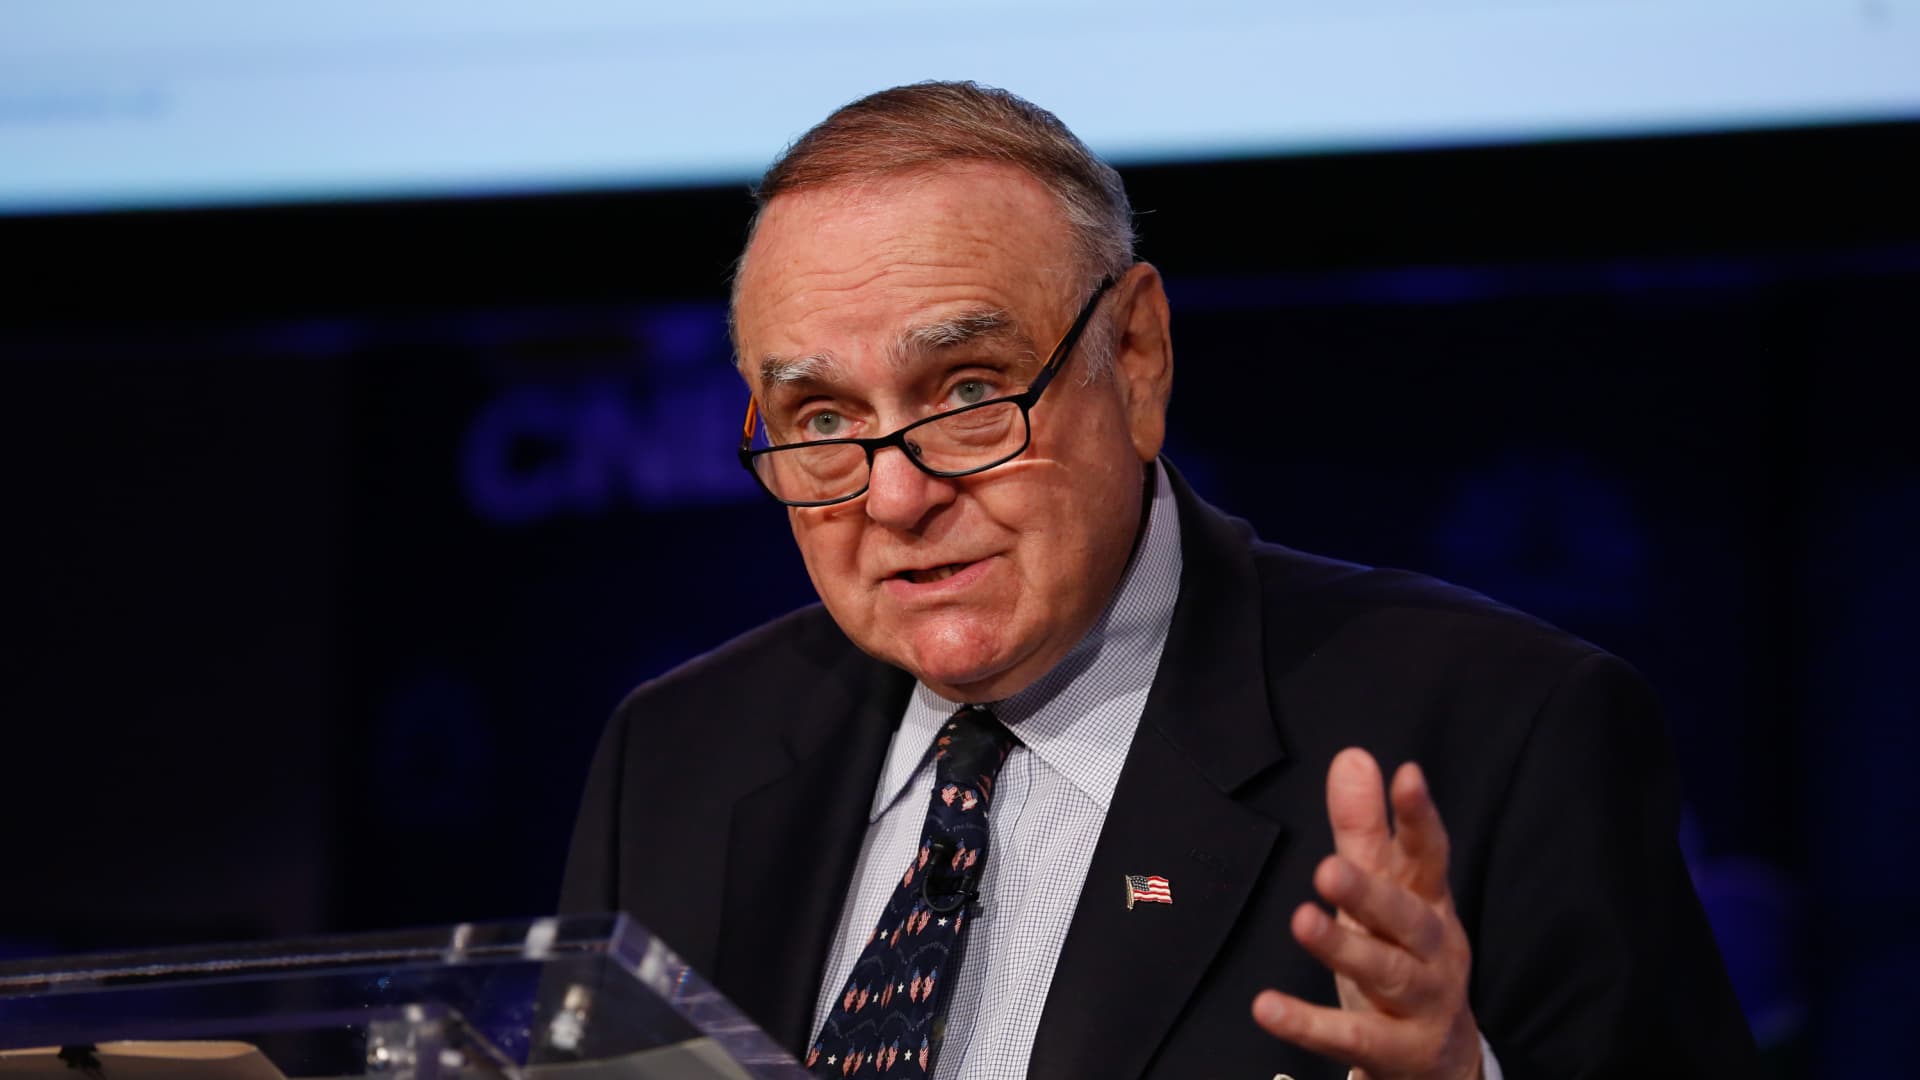 Leon Cooperman says 15% of family office assets are in energy stocks [Video]